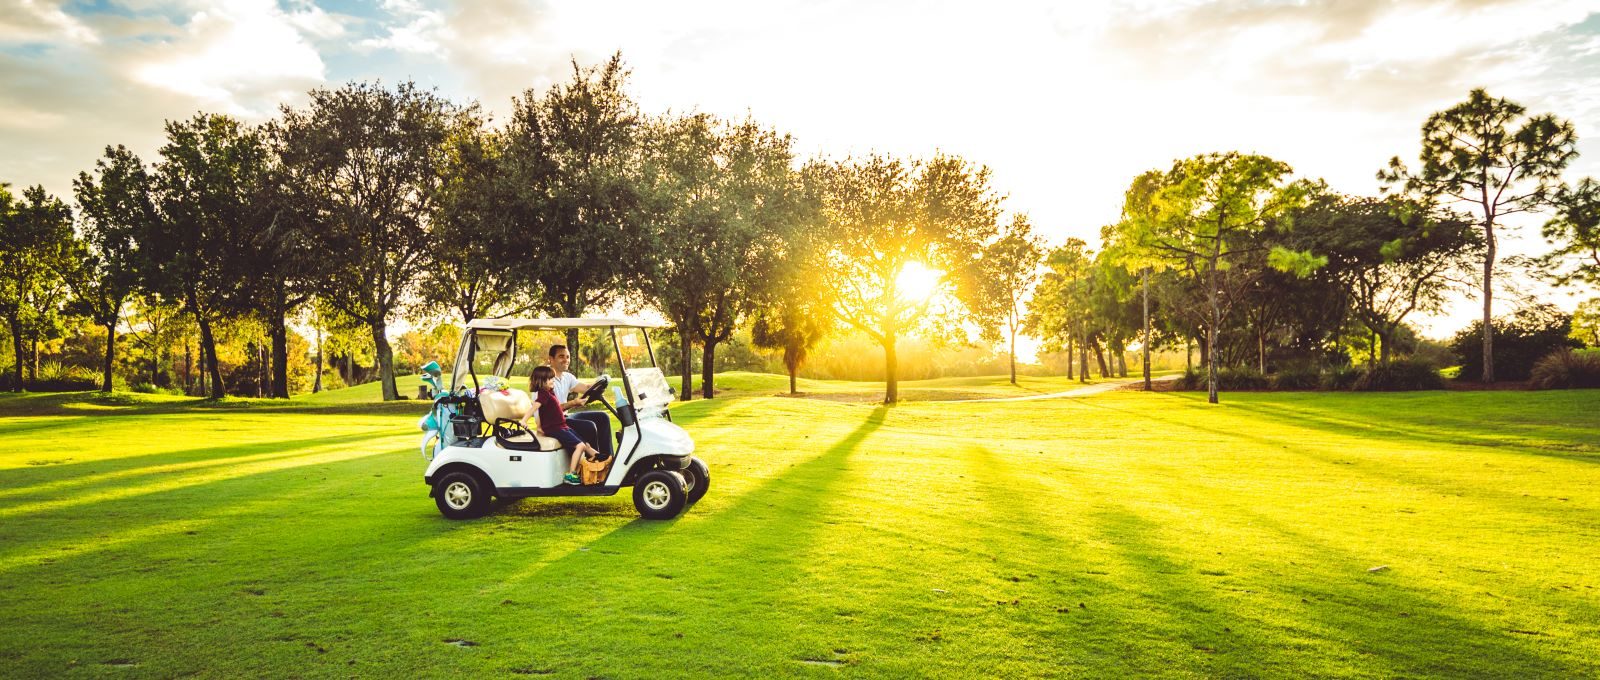 Golf cart injuries are more common than you might think - but can they be prevented? Dr. Cohen has seven tips before your next joy ride.